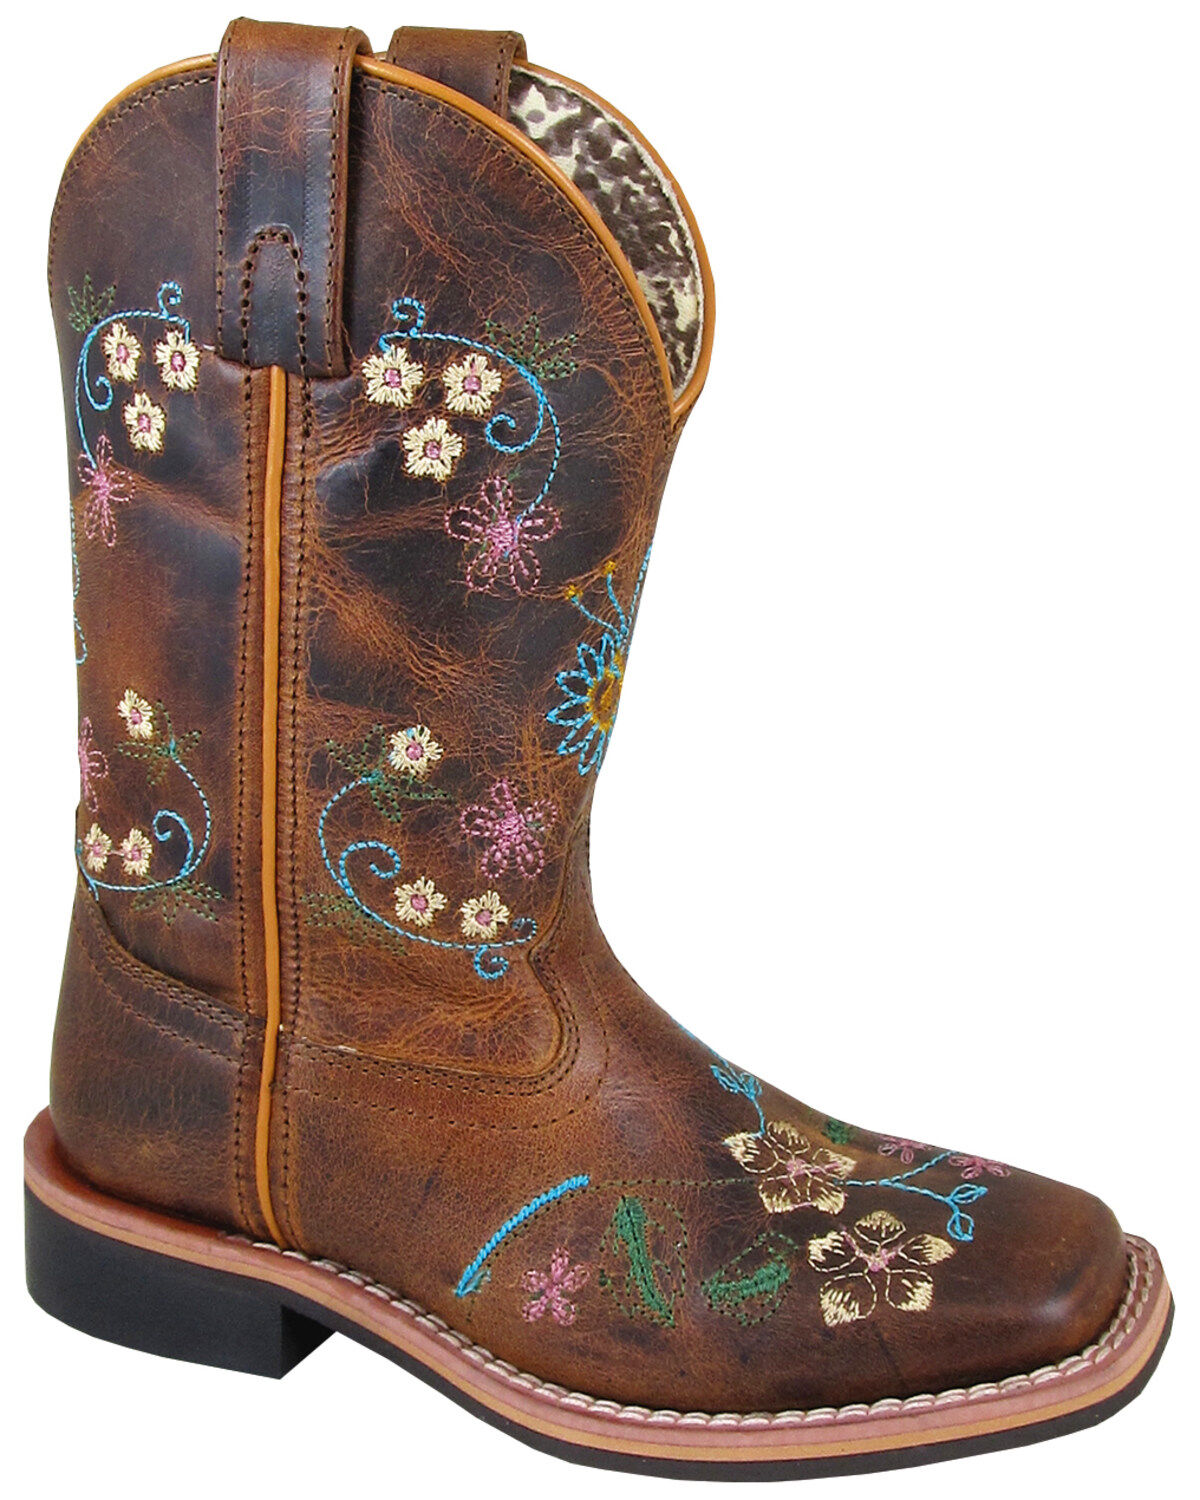 Buy > boots for youth girl > in stock